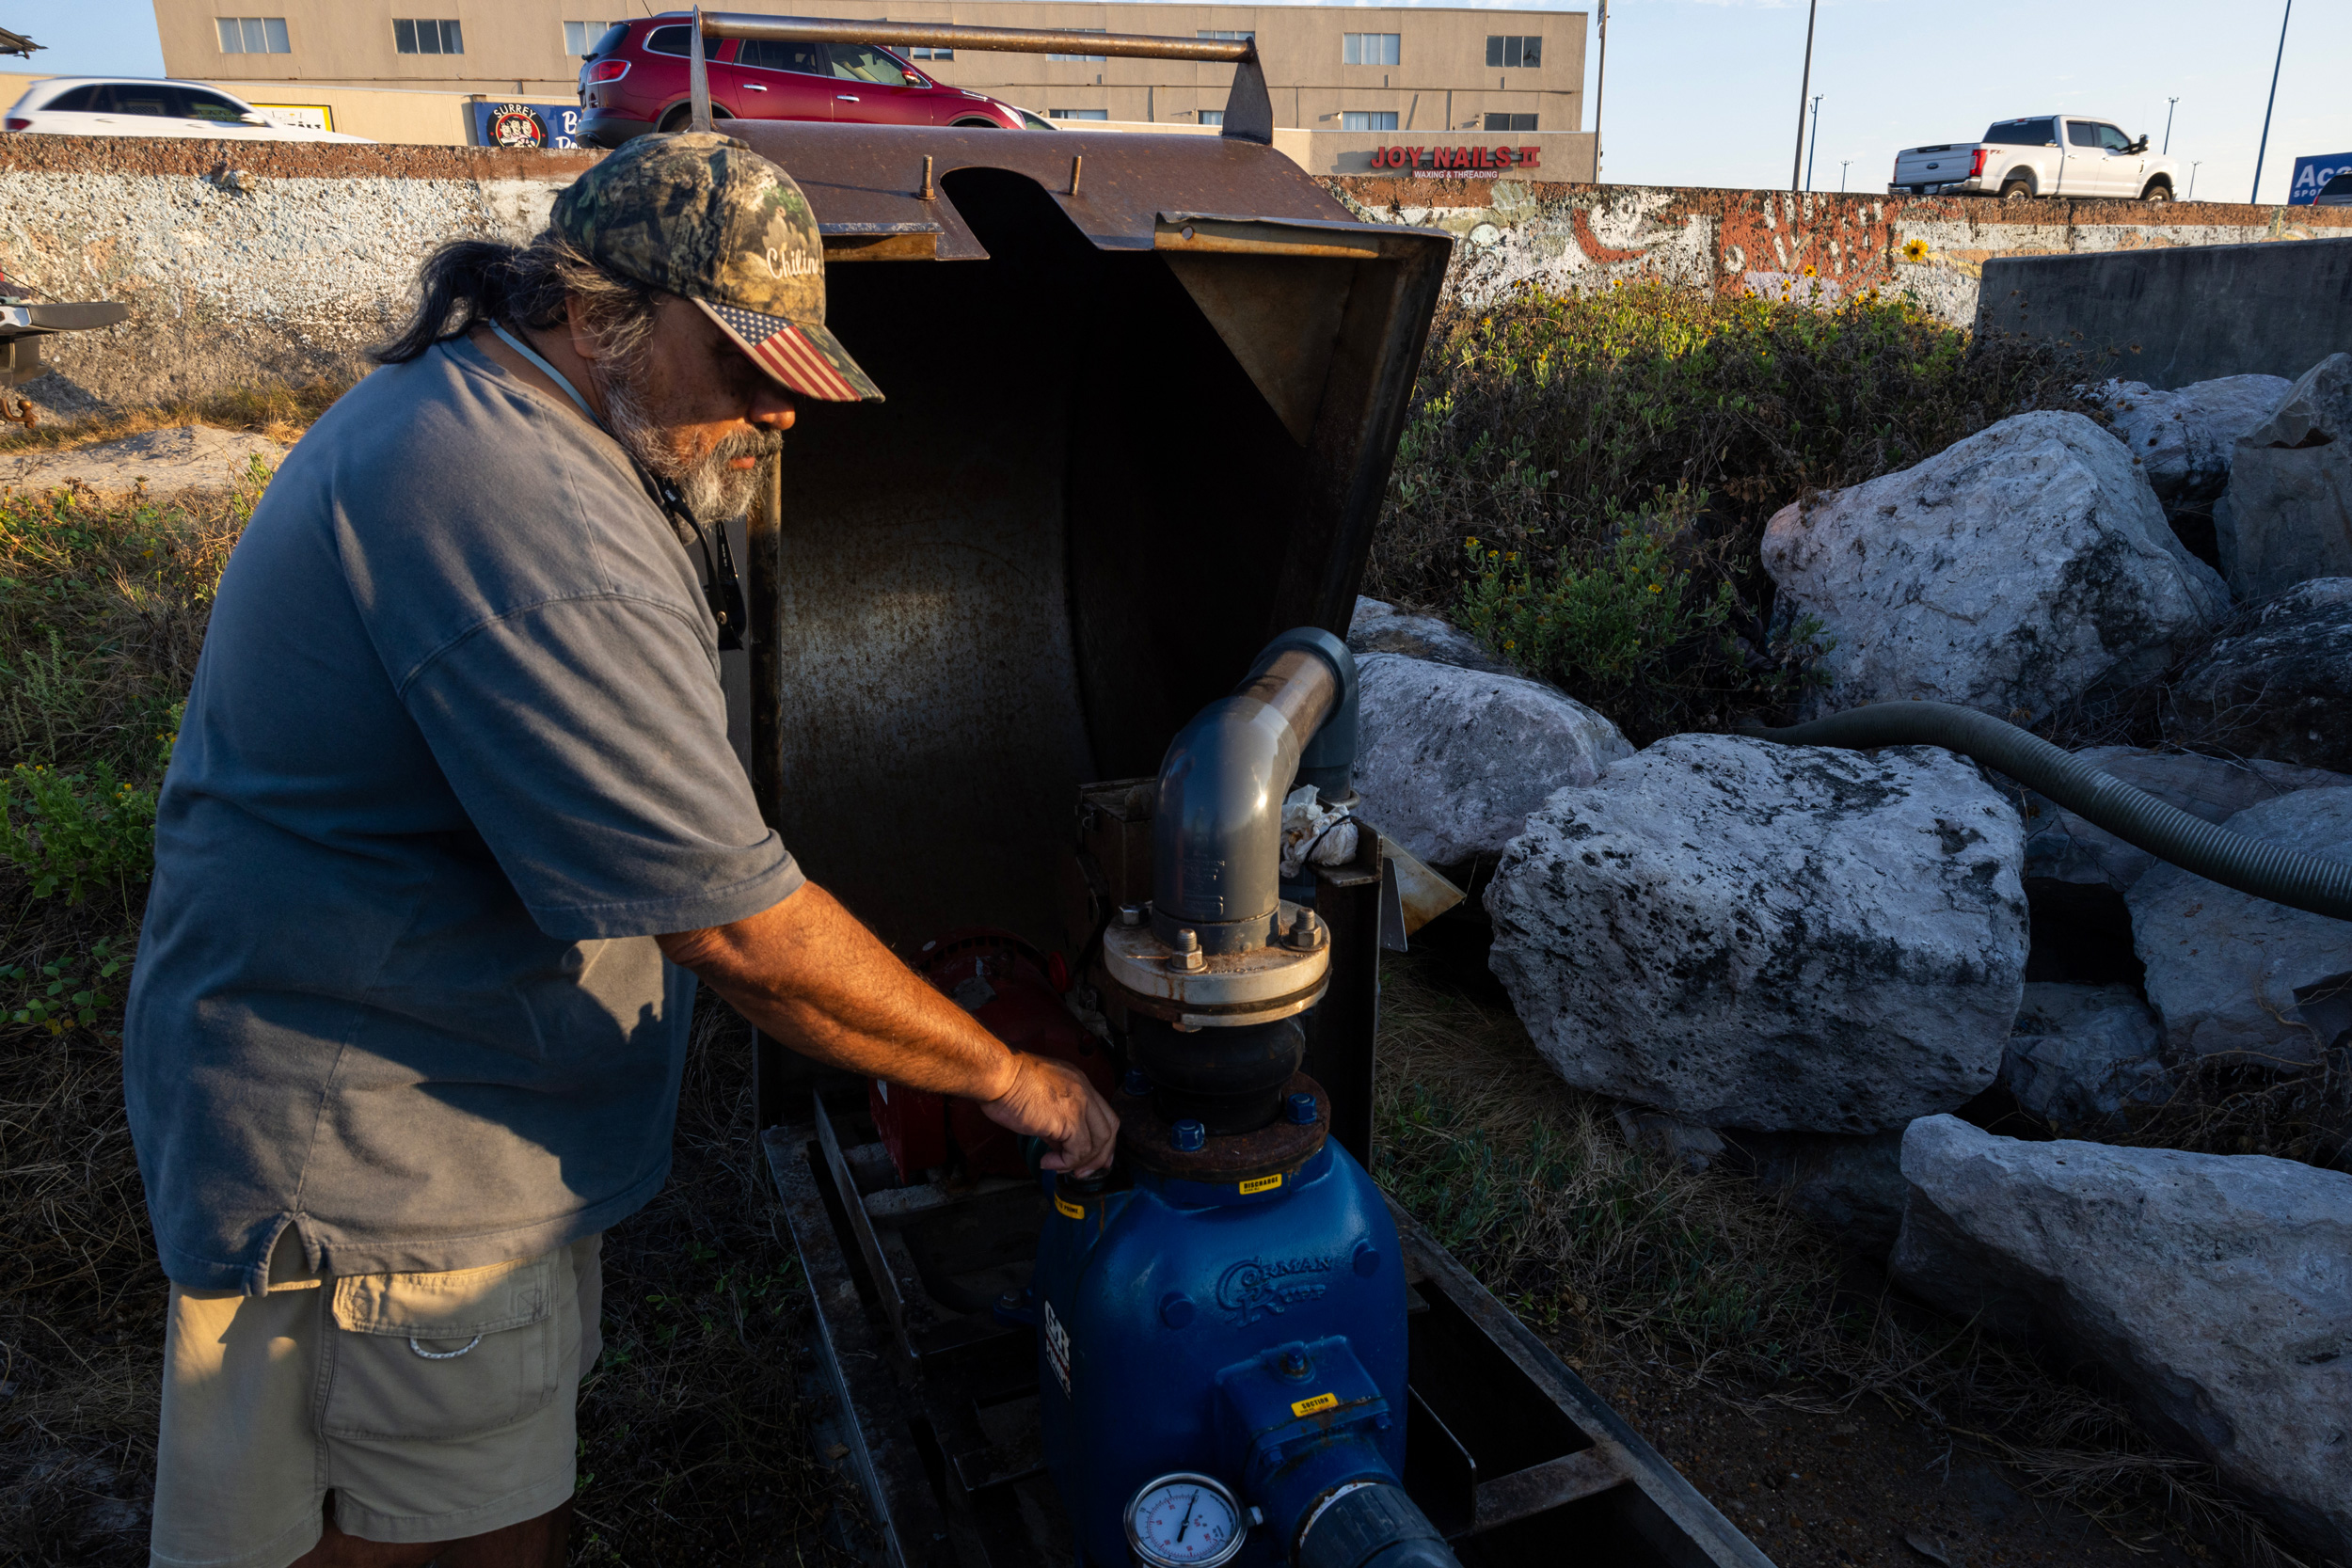 Cain Bustinza, a Research Fishery Biologist at Galveston Laboratory of the Southeast Fisheries Science Center, checks on a seawater pump used to capture sea water for sea turtles at Galveston Beach